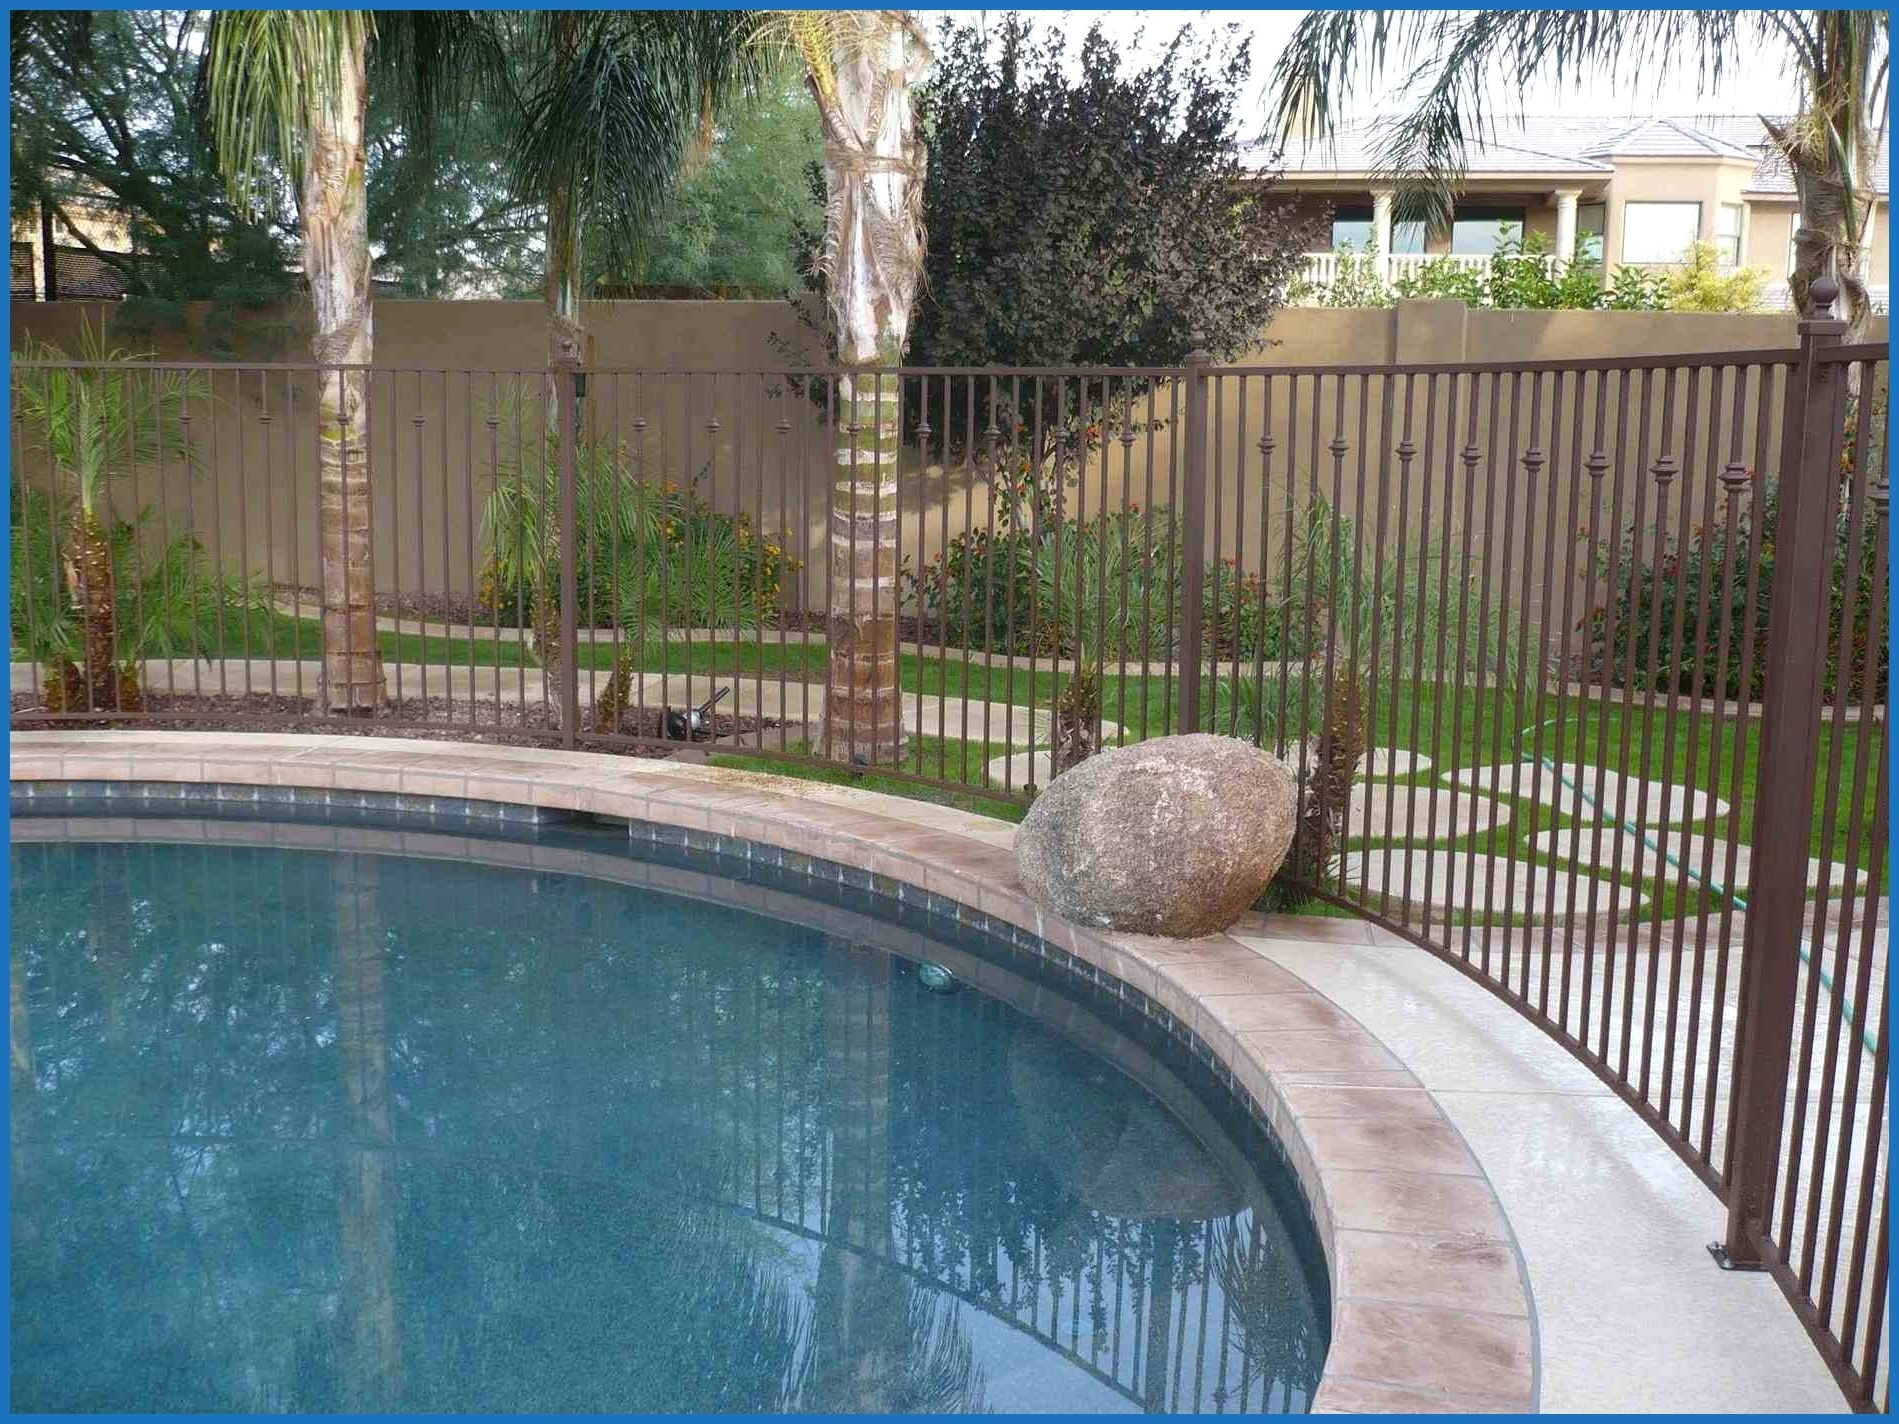 Terrific Amazing Ba Barrier Pool Fence Parts Pics Of Fence intended for size 1899 X 1424